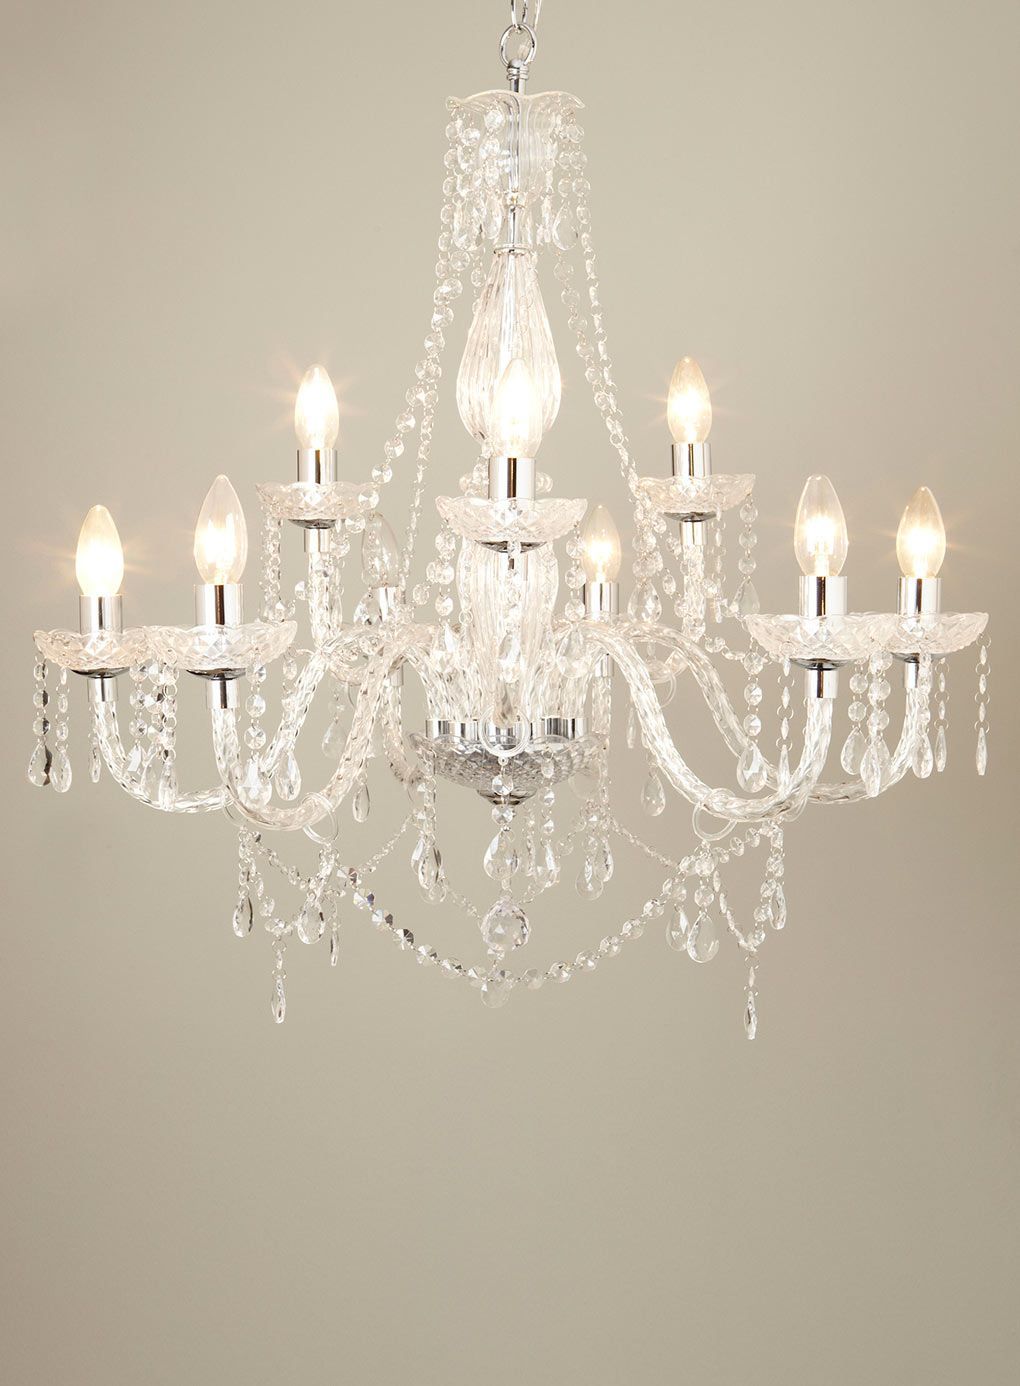 Bryony 9 Light Chandelier | Furniture | Chandelier Lighting Intended For Kenedy 9 Light Candle Style Chandeliers (View 28 of 30)